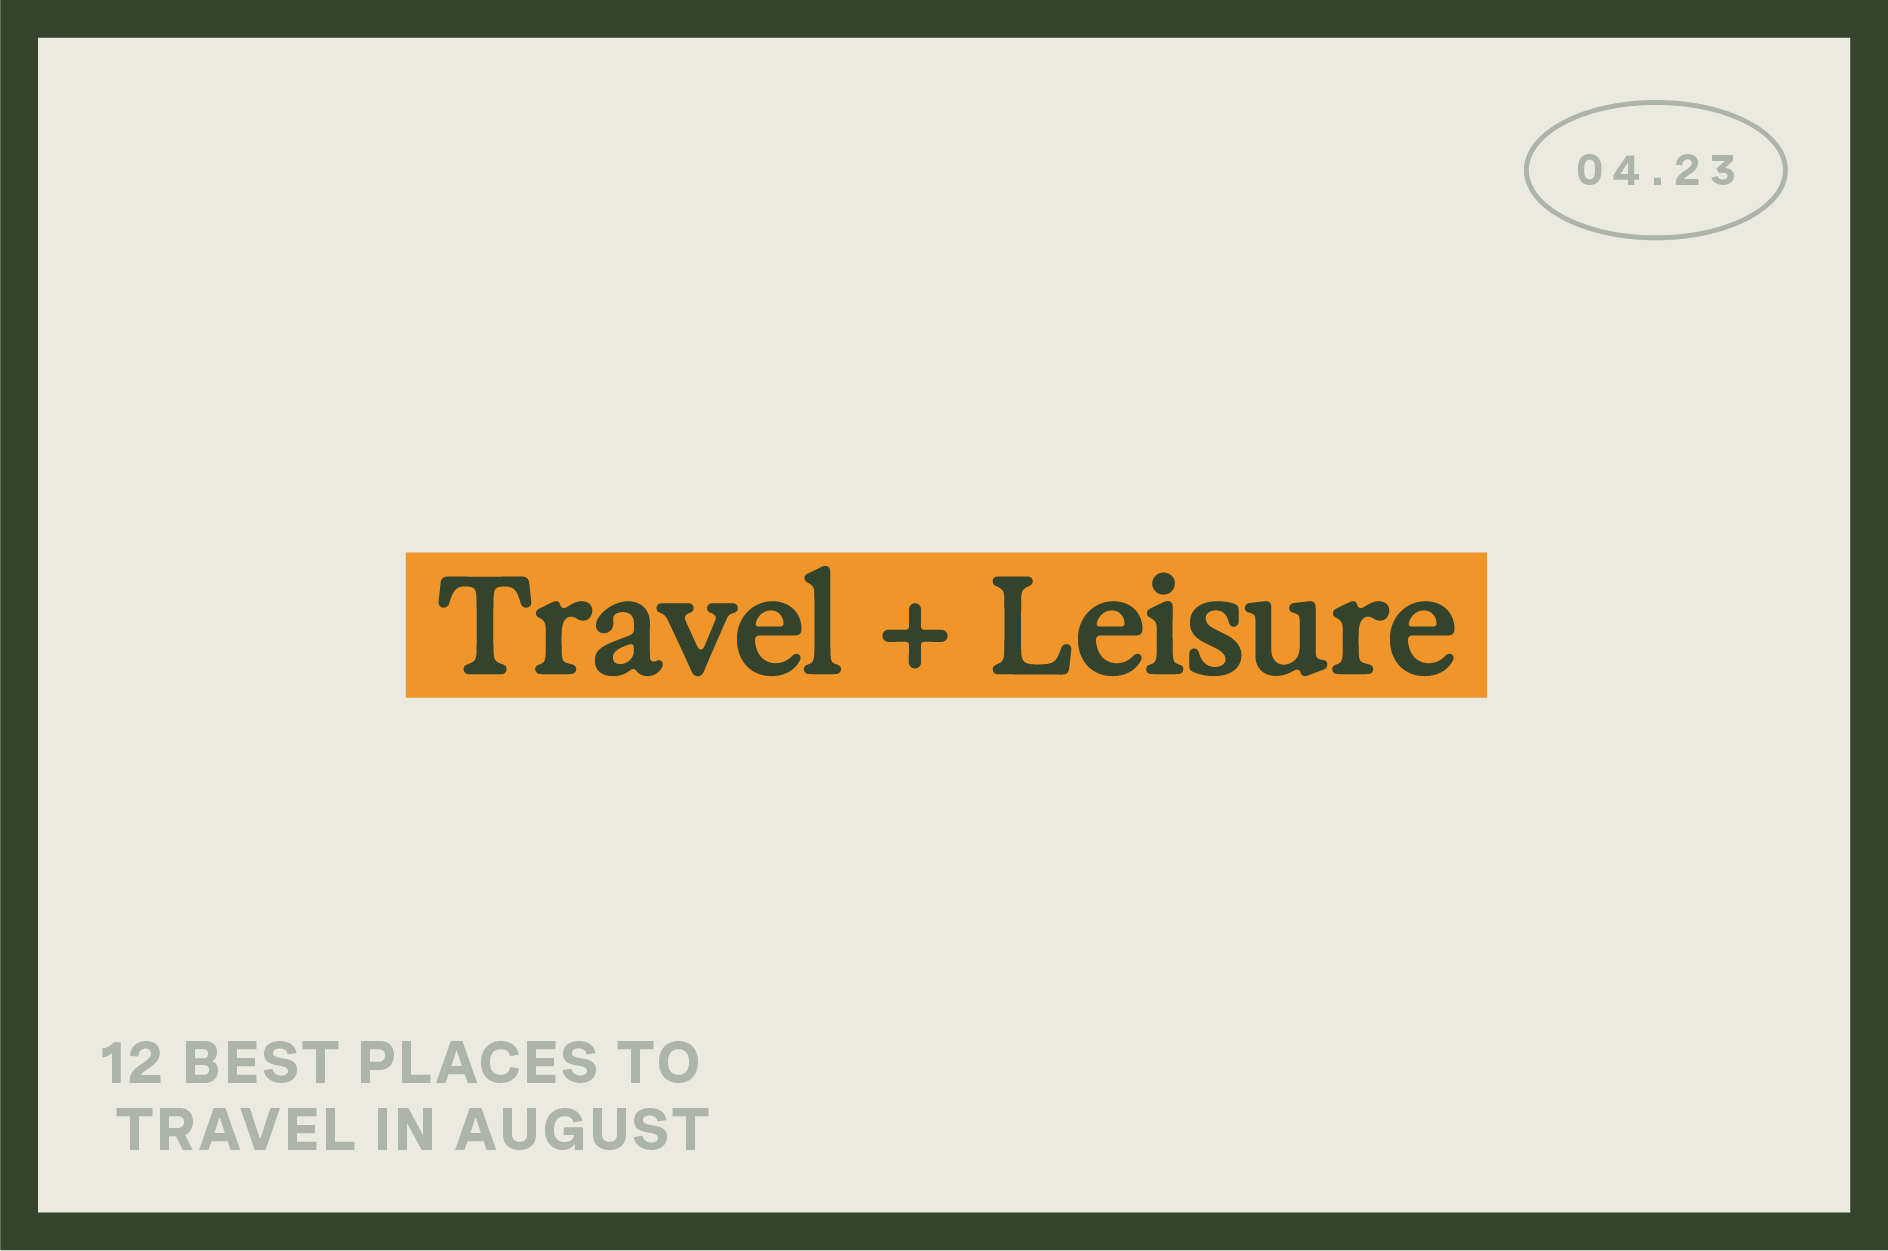 "Travel + Leisure" banner showcases "12 best places to travel in August."